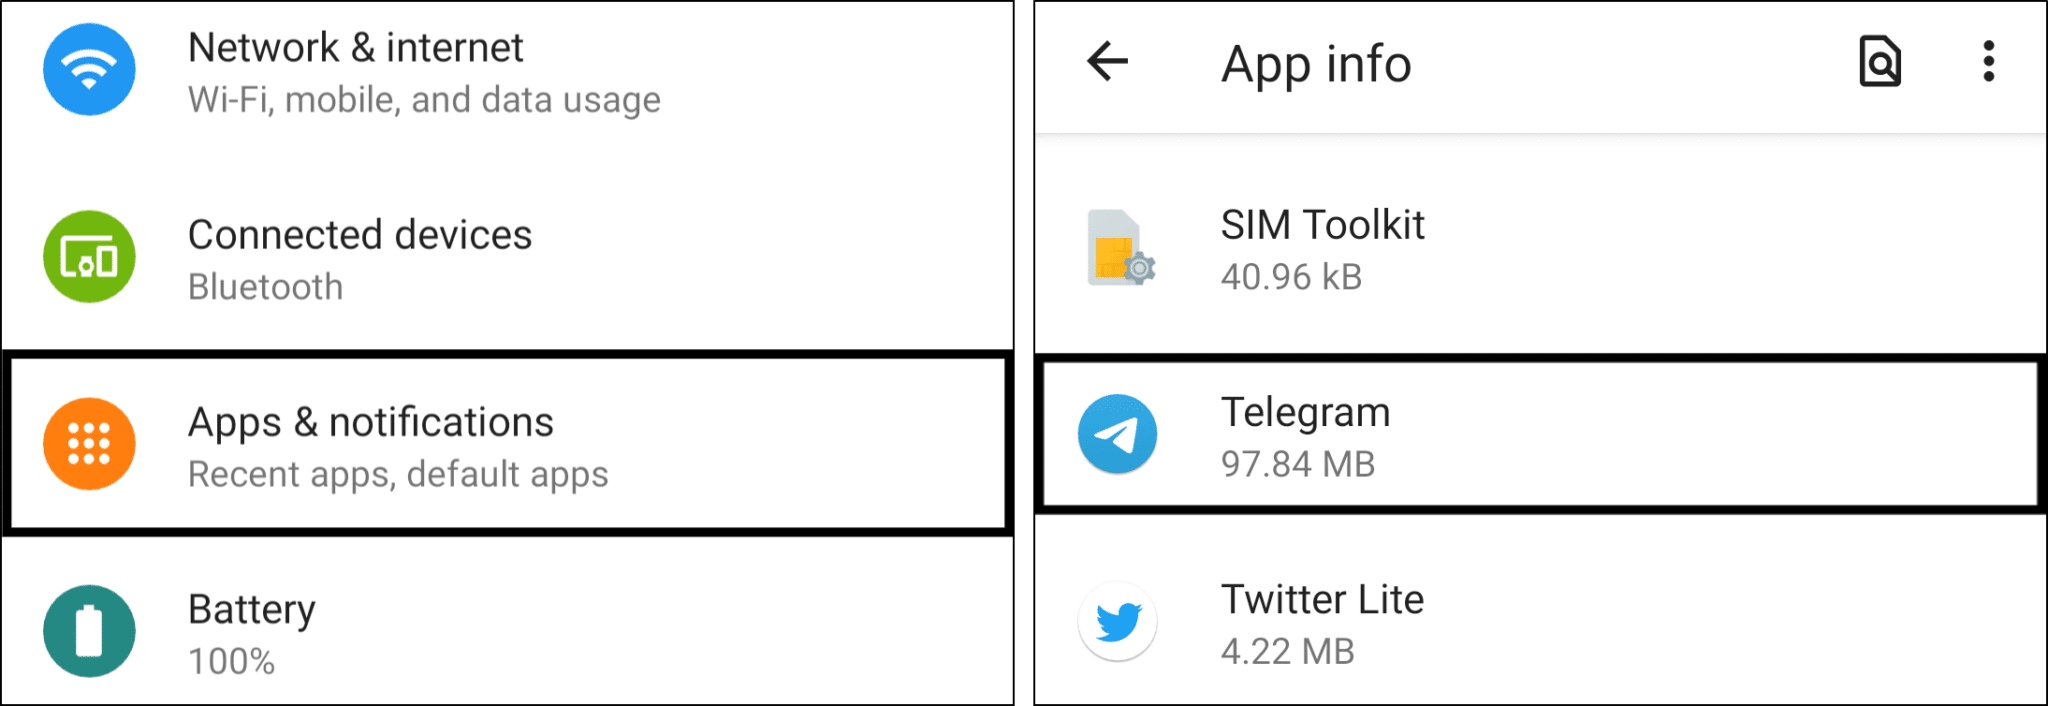 access Telegram app settings in system settings on Android to clear cache and data to fix notifications not working or showing